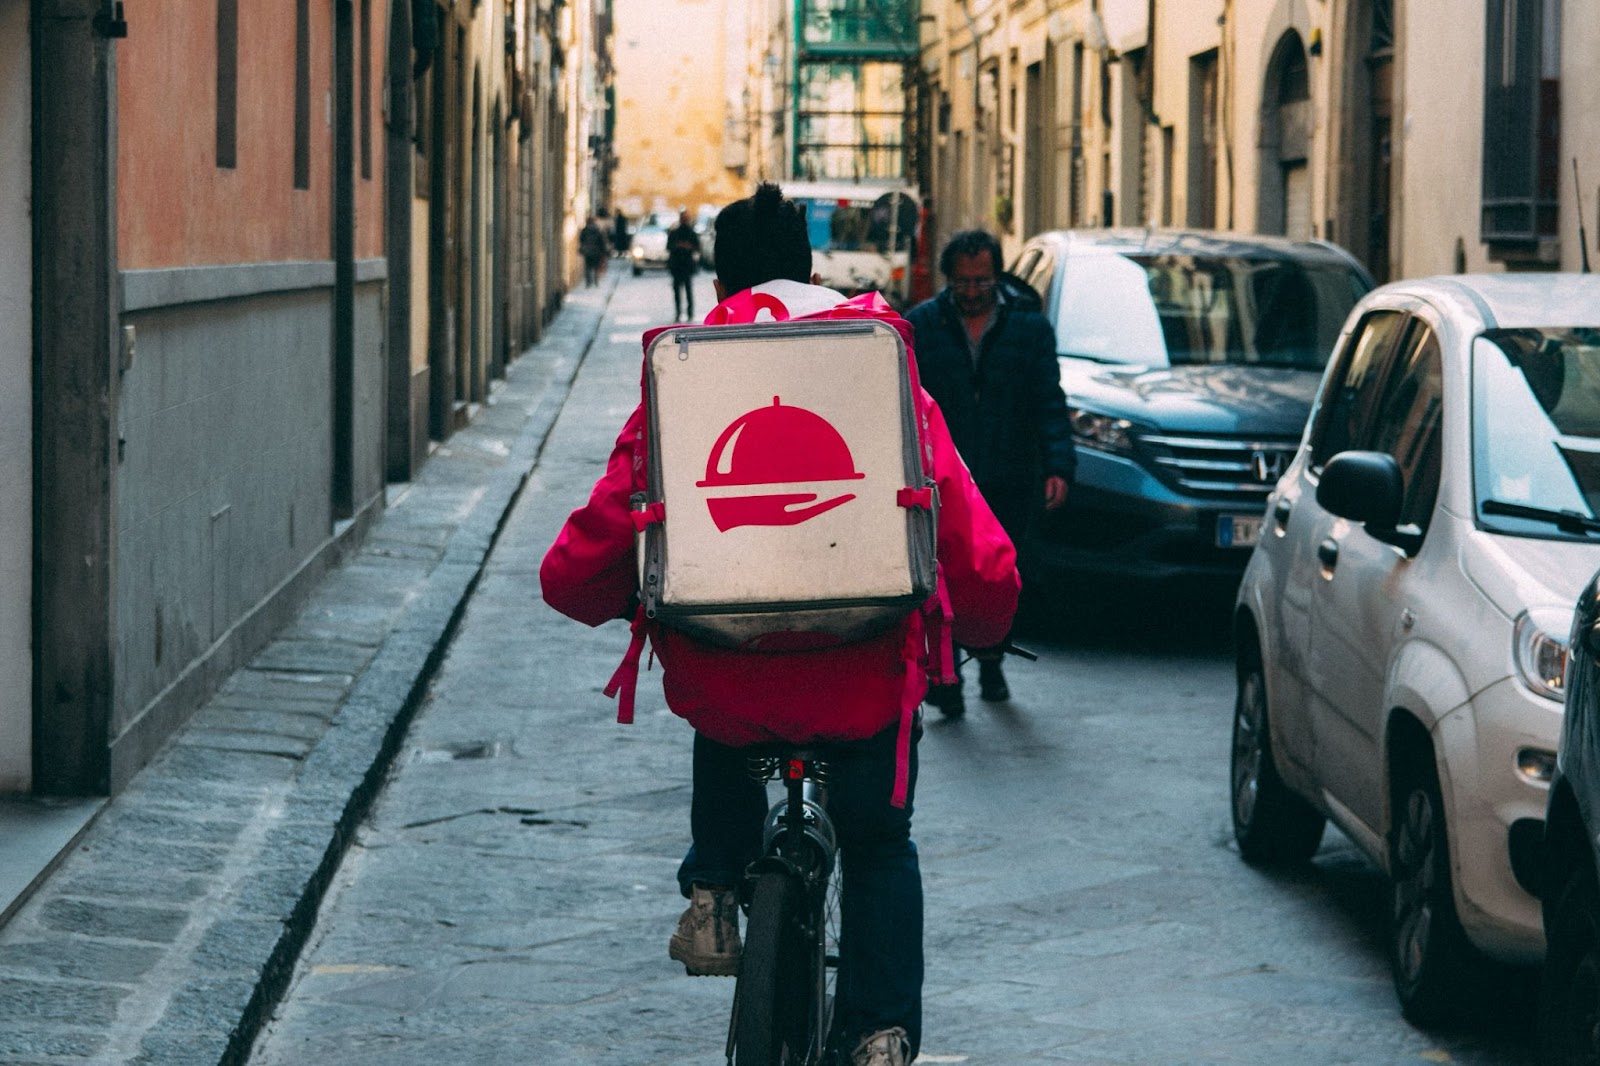 Delivery man from an online food delivery service provider cruising the street to complete their orders on time.